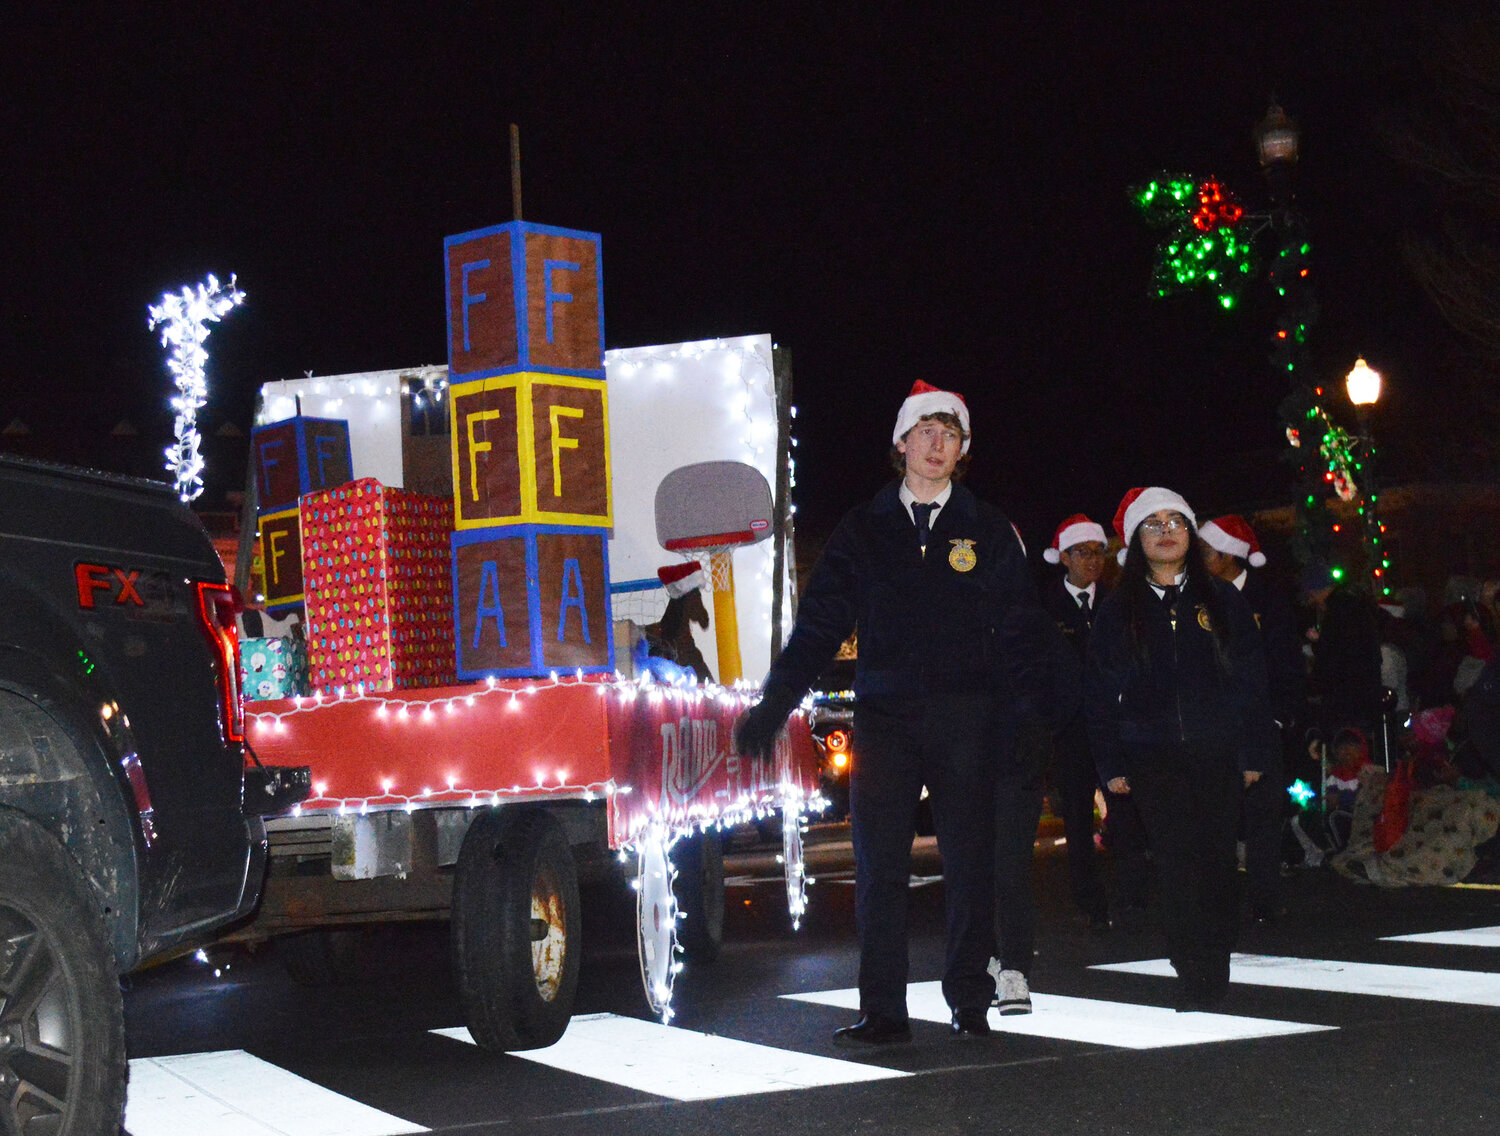 The Sussex Central High School National FFA Organization entry loops around The Circle in Thursday's Georgetown Christmas Parade.